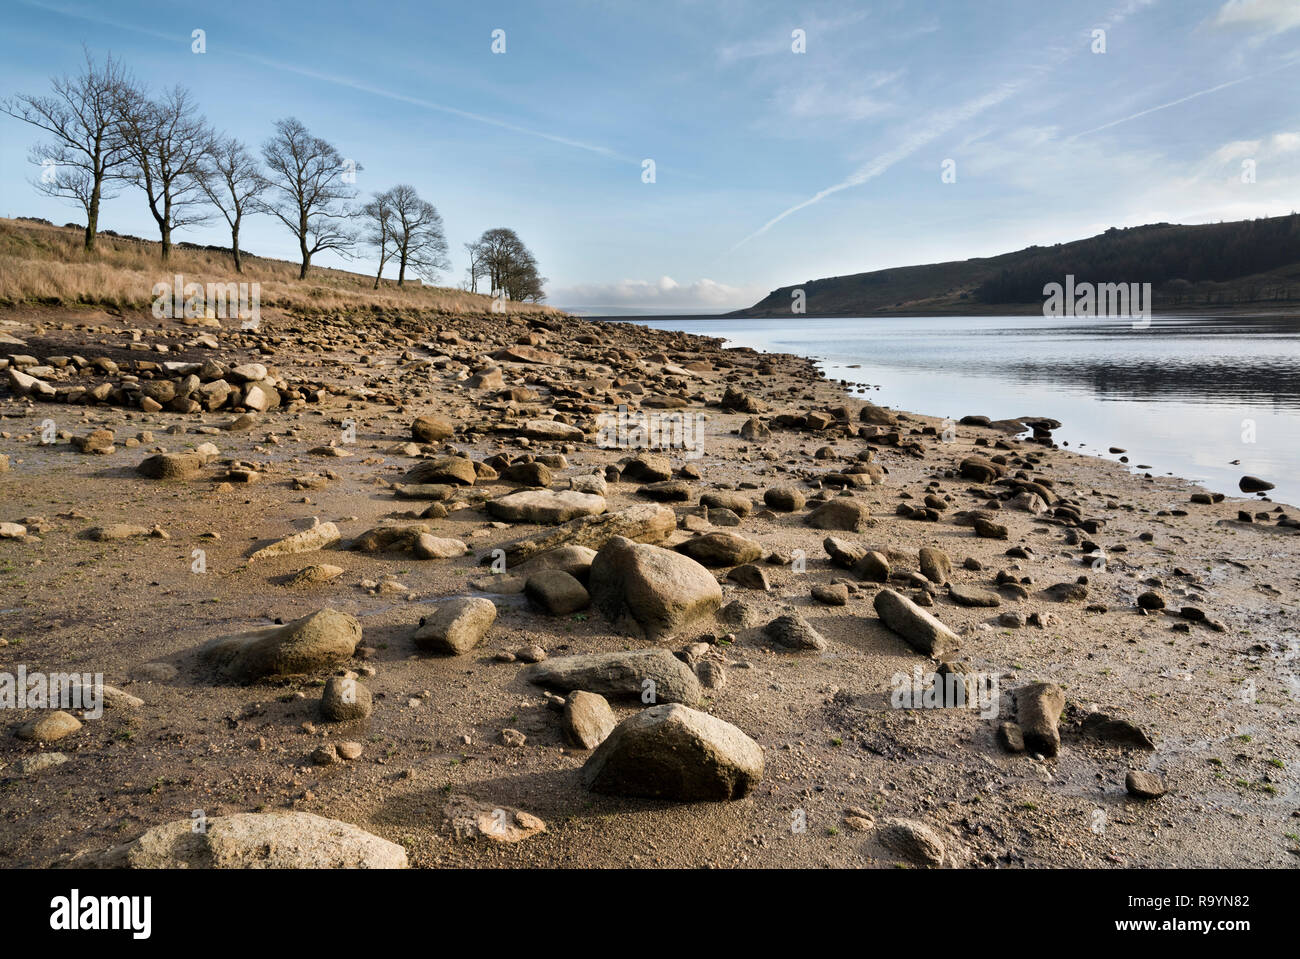 Yorkshire Water's Widdop Reservoir near Hebden Bridge. The edge of the reservoir is revealed due to low water levels as a result of  insufficient rain. Stock Photo